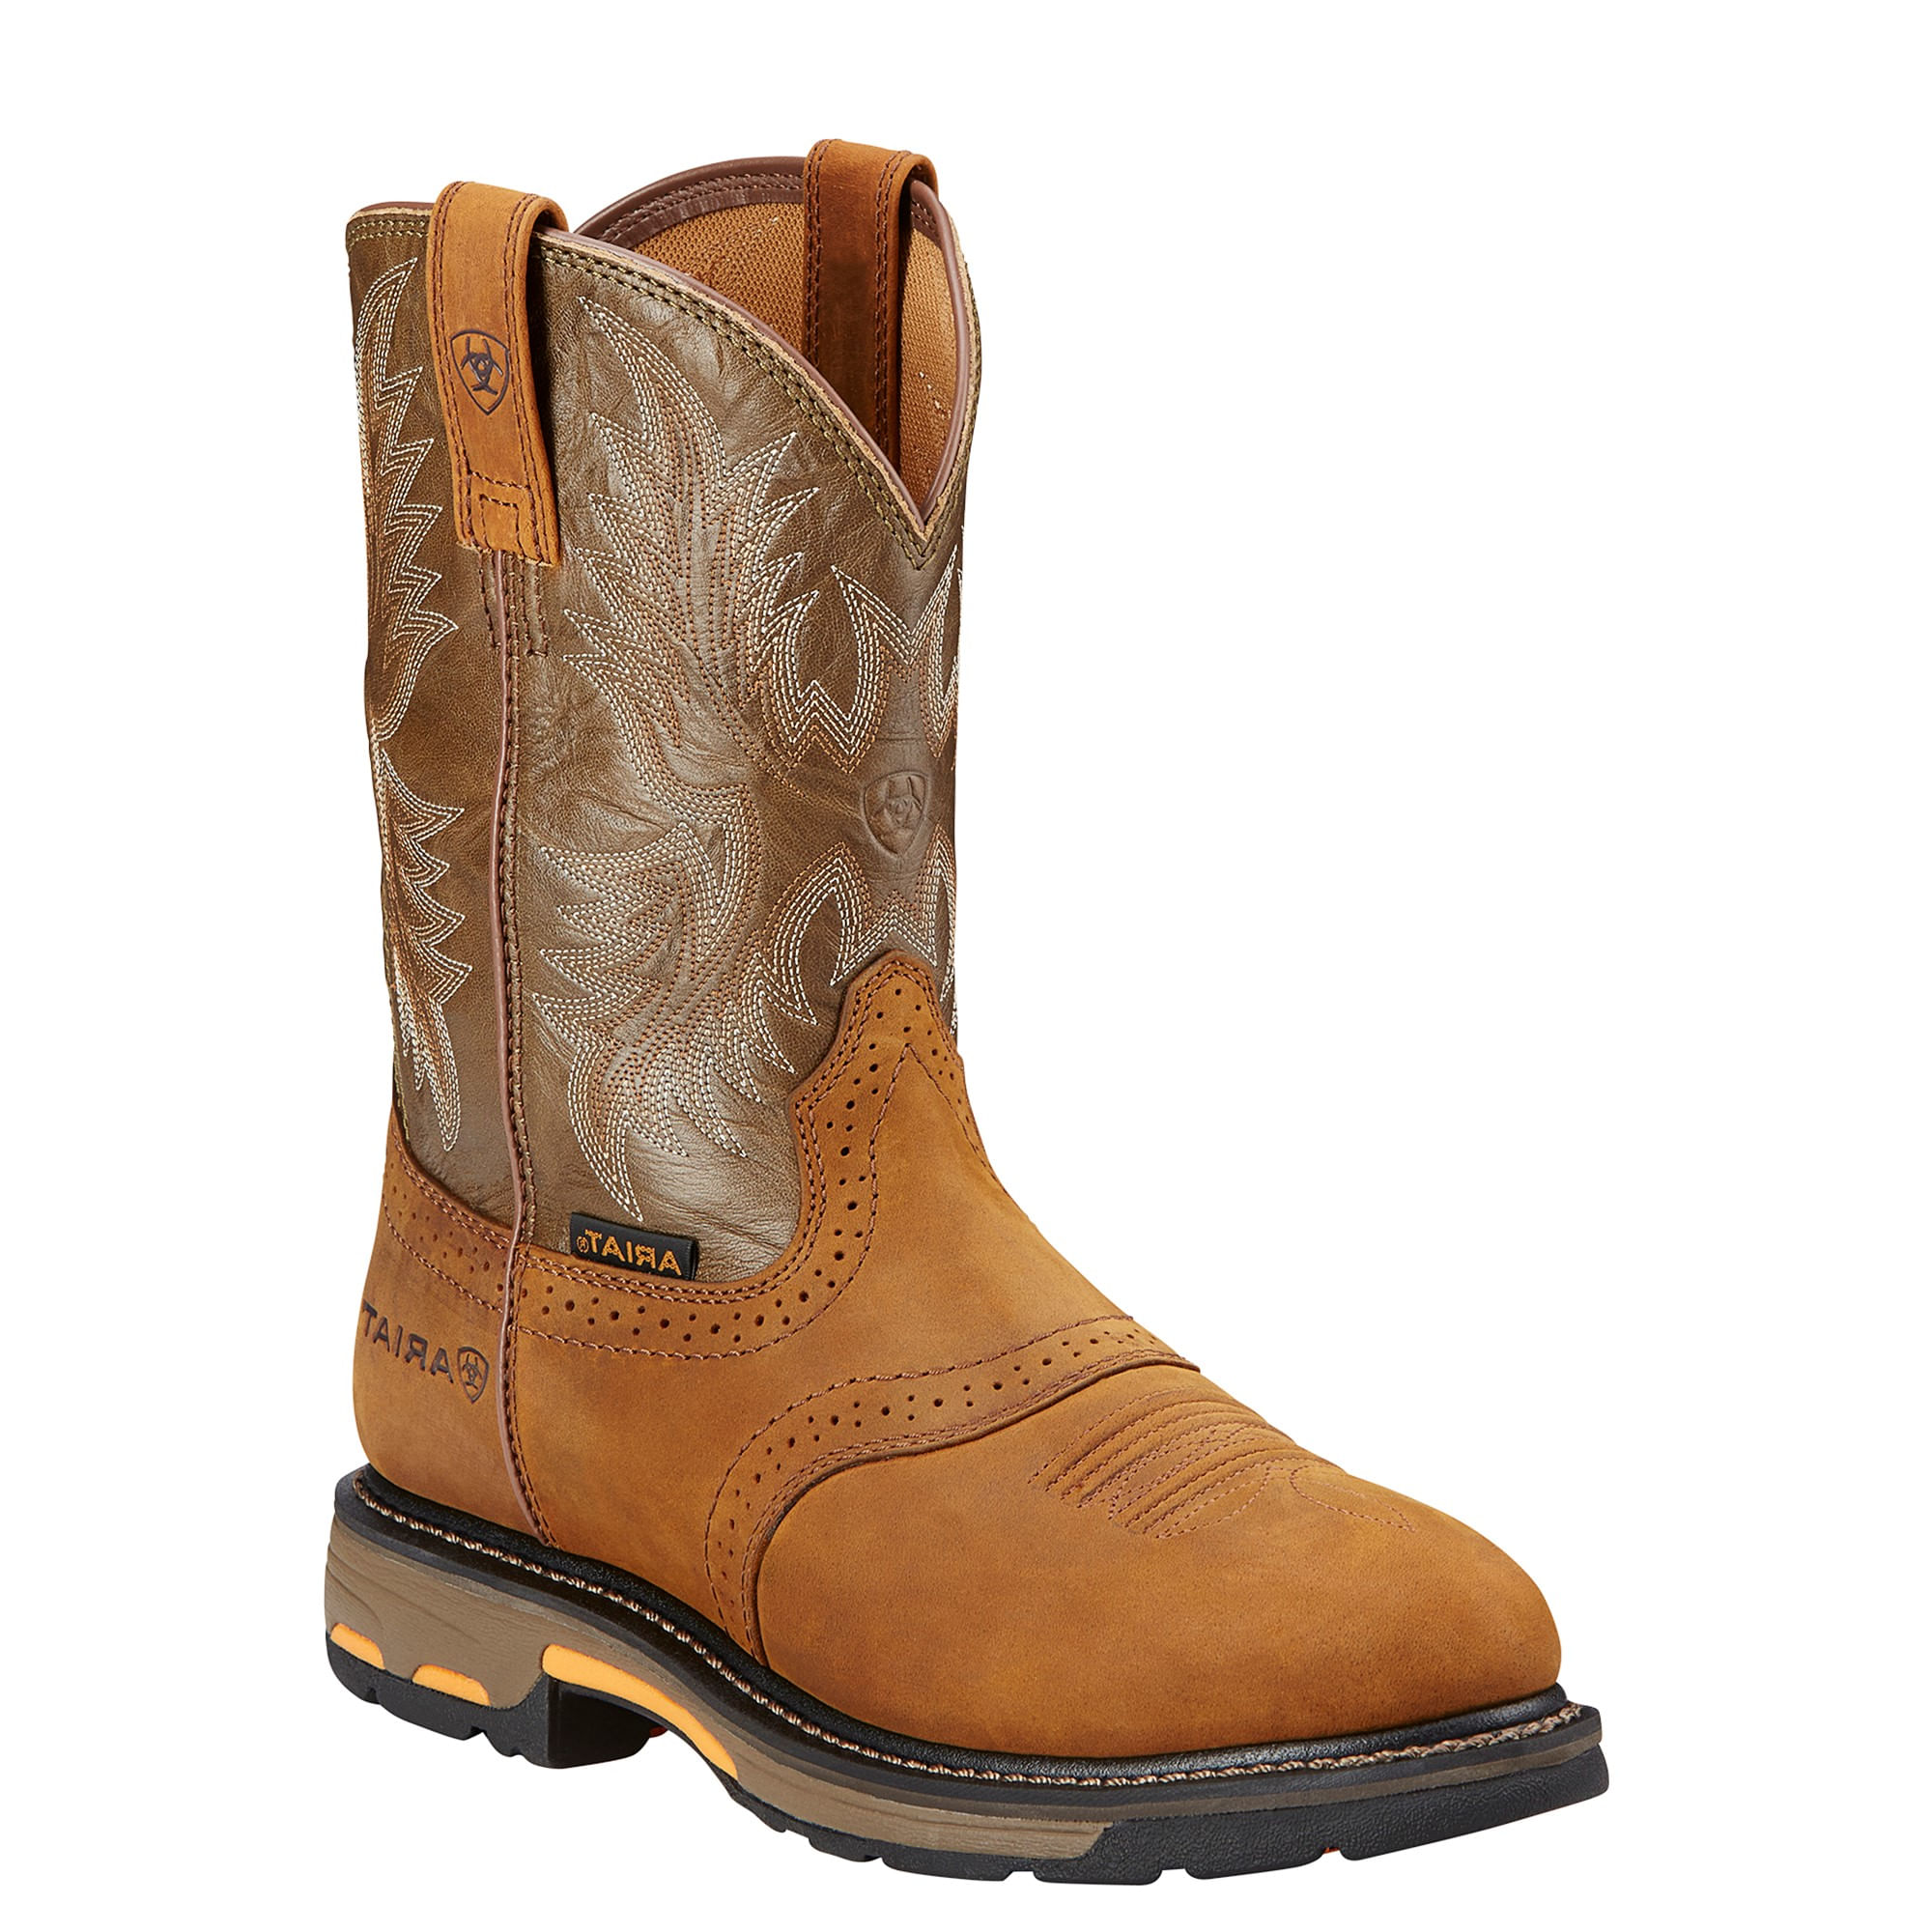 Ariat Round Toe Boots Top Sellers | bellvalefarms.com